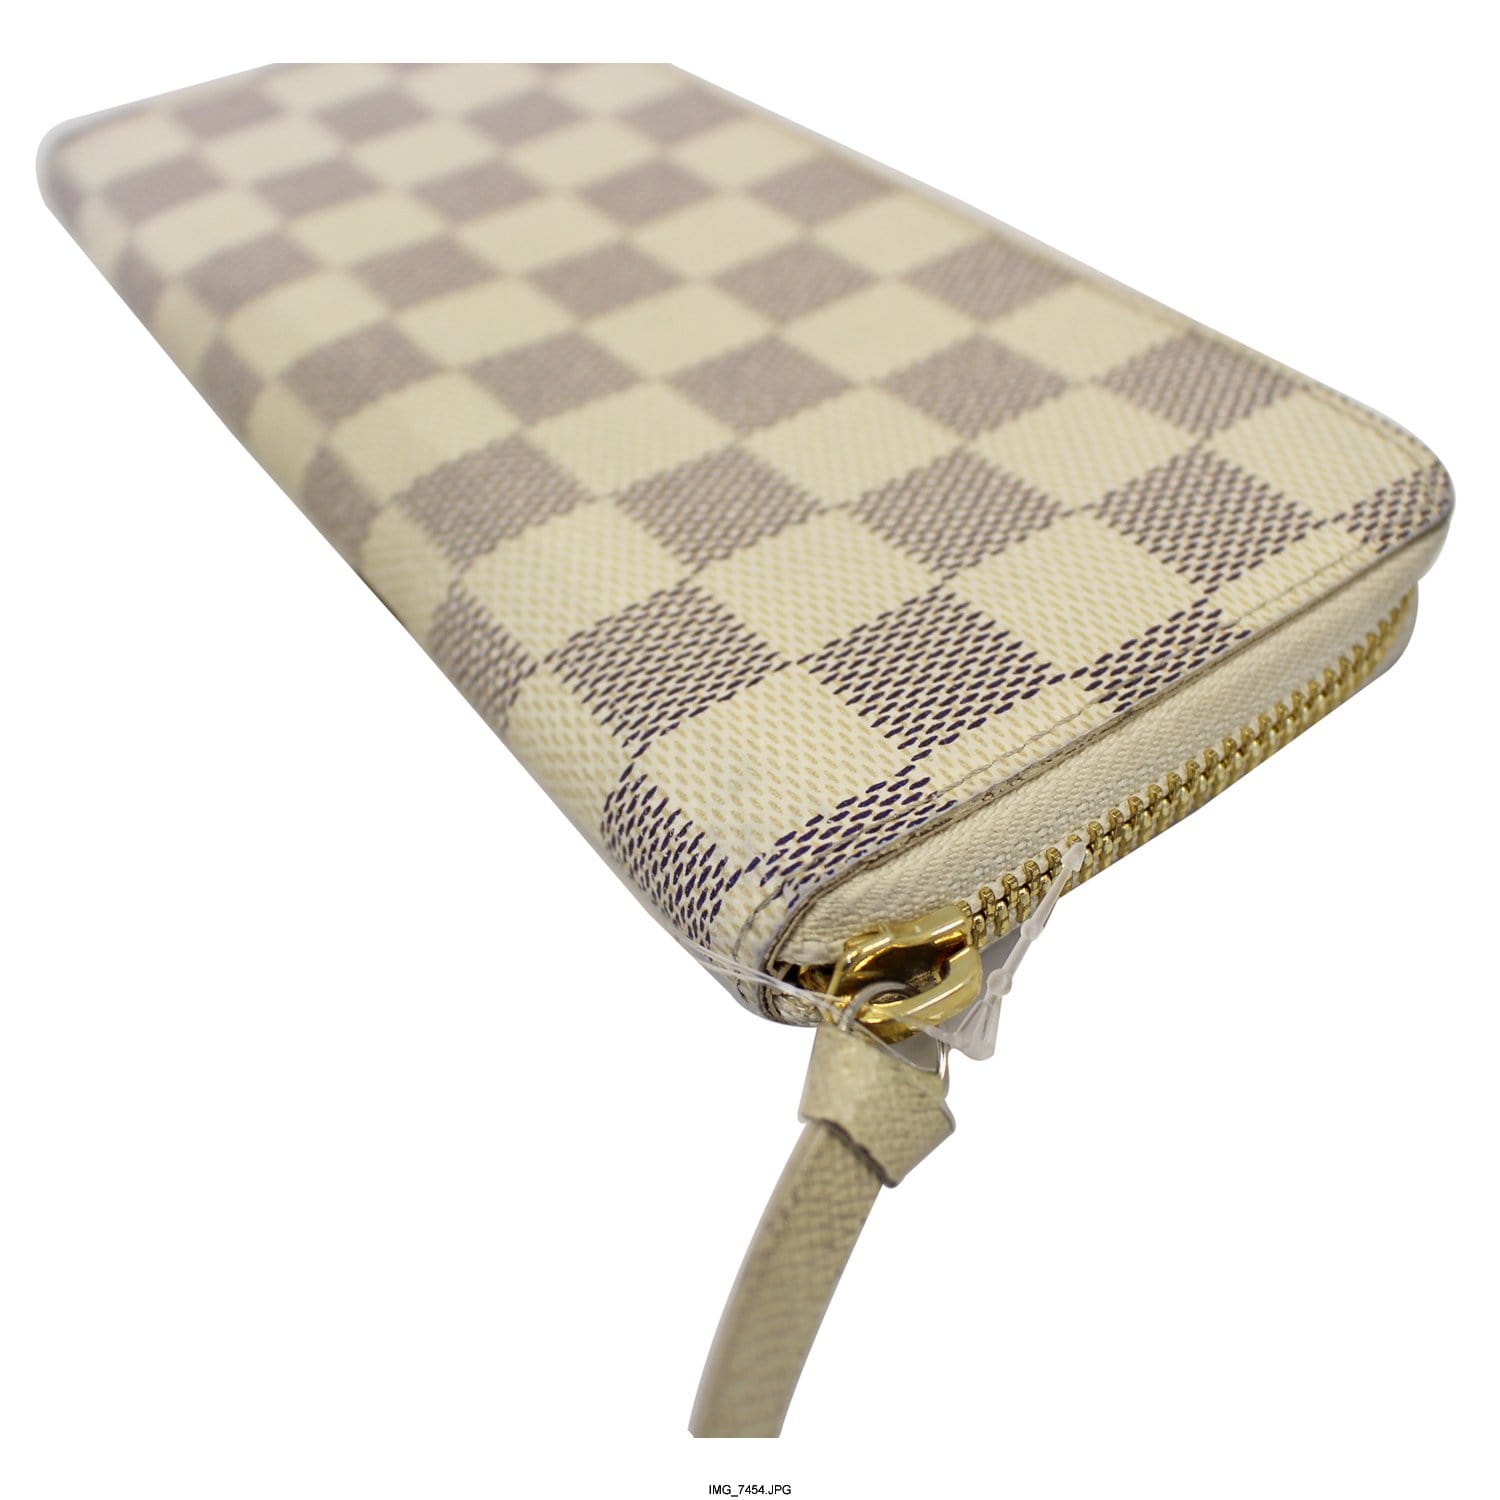 LOUIS VUITTON LOUIS VUITTON Portefeuille clemence Round purse N61264 Damier  Azur canvas Used N61264｜Product Code：2104102043809｜BRAND OFF Online Store